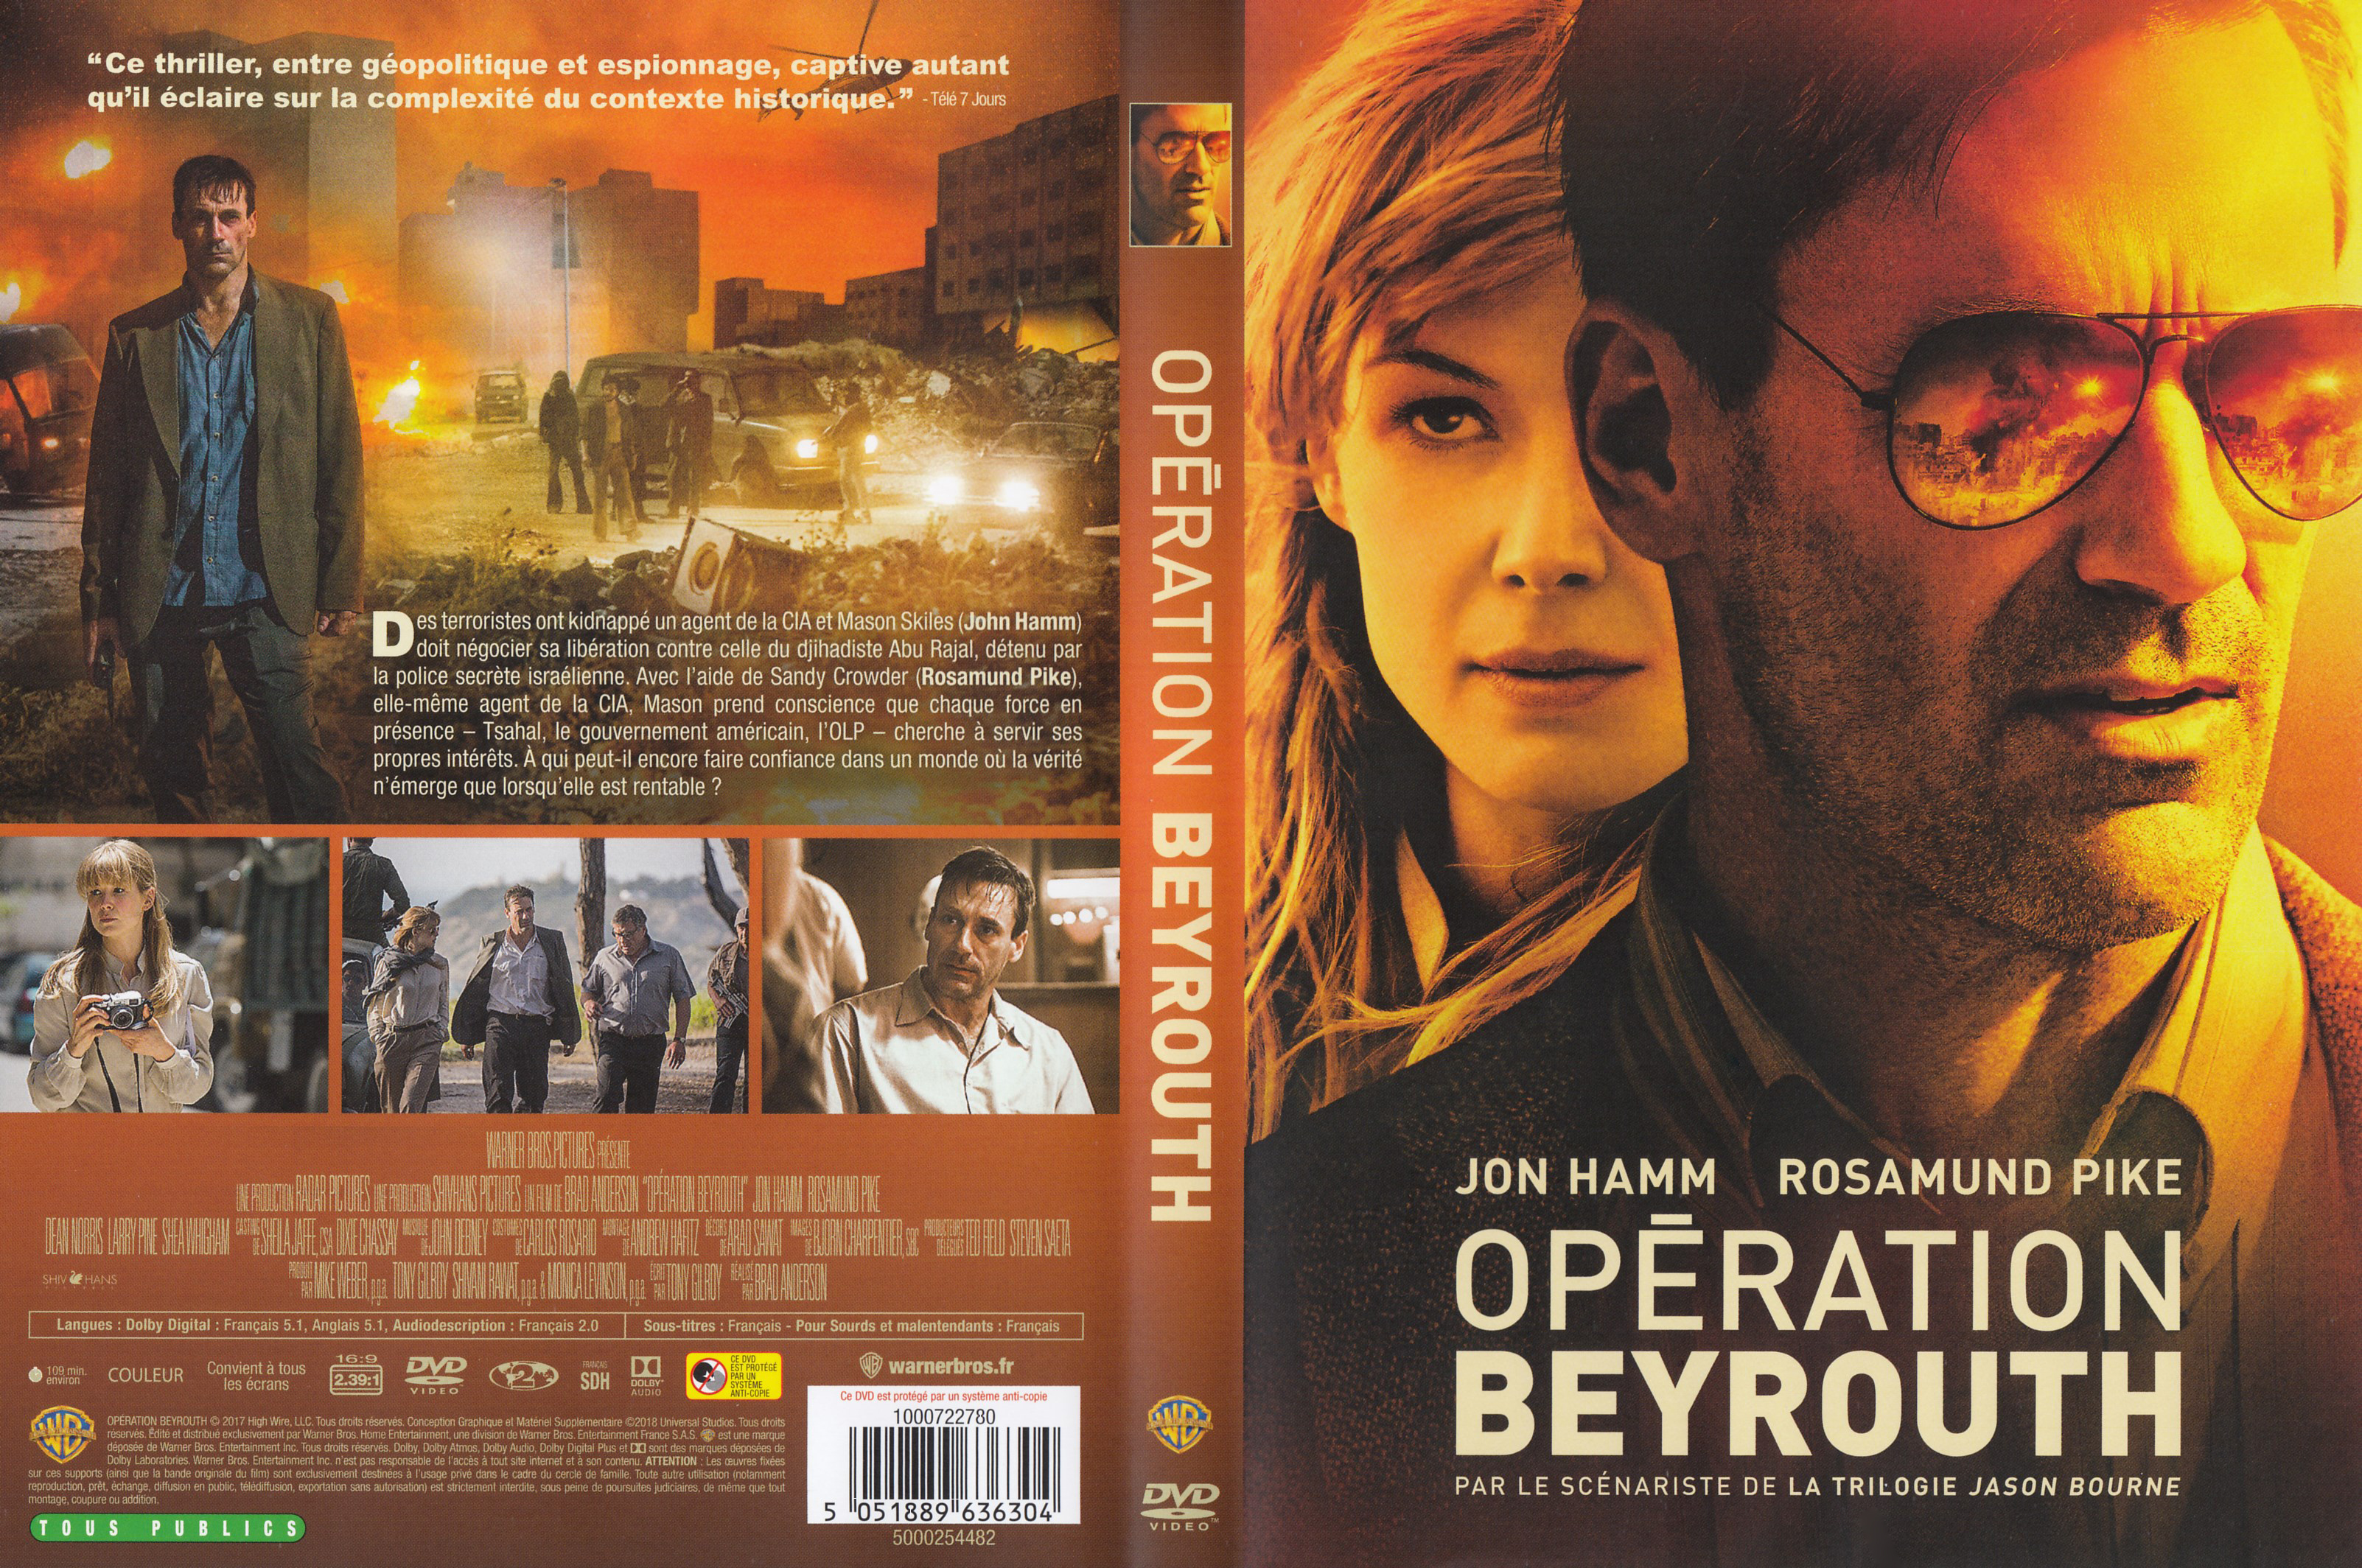 Jaquette DVD Opration Beyrouth